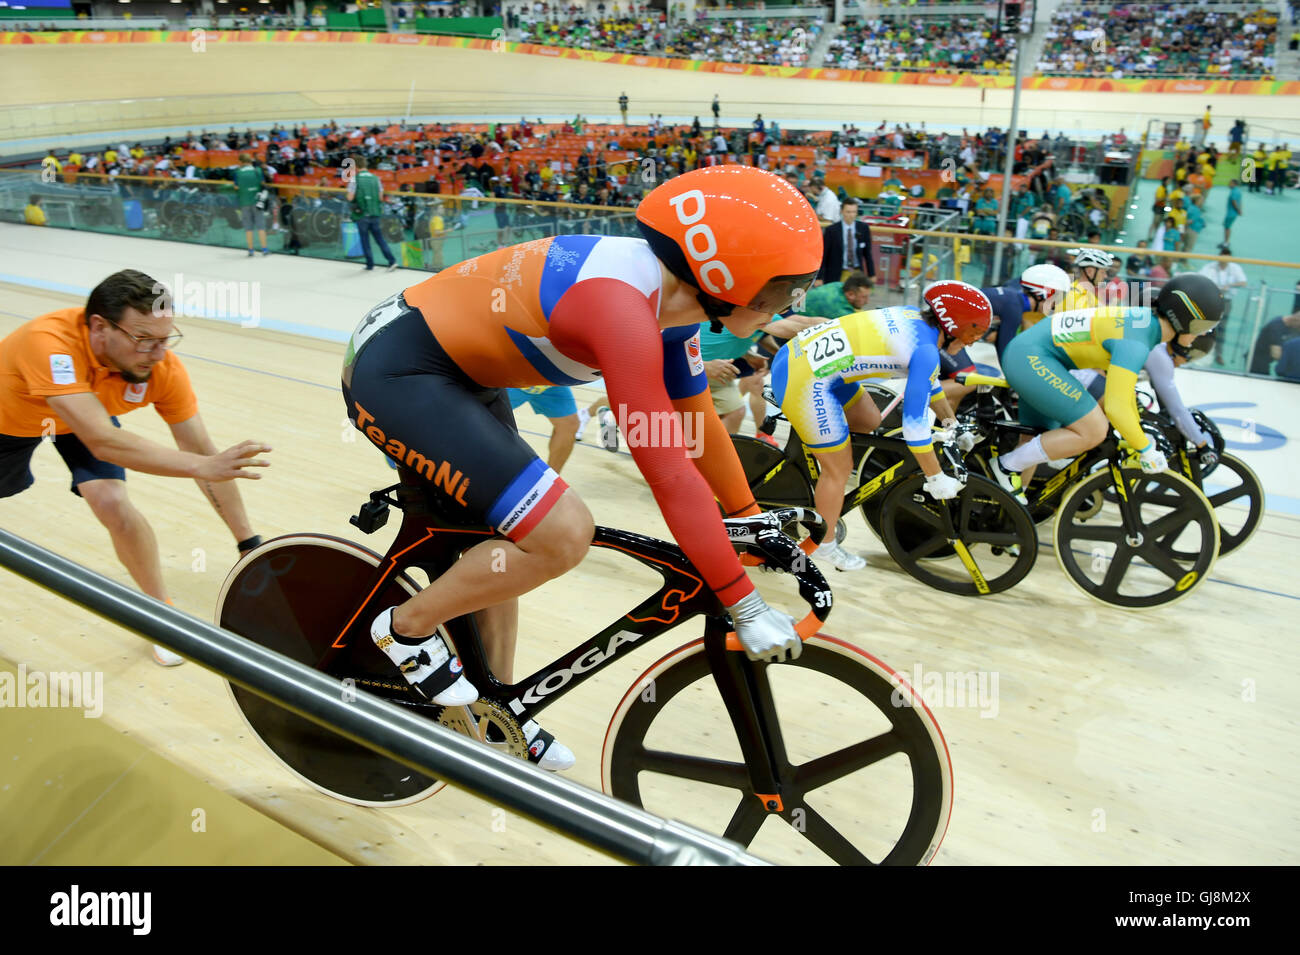 Rio de Janeiro, Brazil. 13th Aug, 2016. Laurine Van Riessen of the Netherlands in action during the Women's Keirin Second Round of the Rio 2016 Olympic Games Track Cycling events at Velodrome in Rio de Janeiro, Brazil, 13 August 2016. Photo: Felix Kaestle/dpa/Alamy Live News Stock Photo